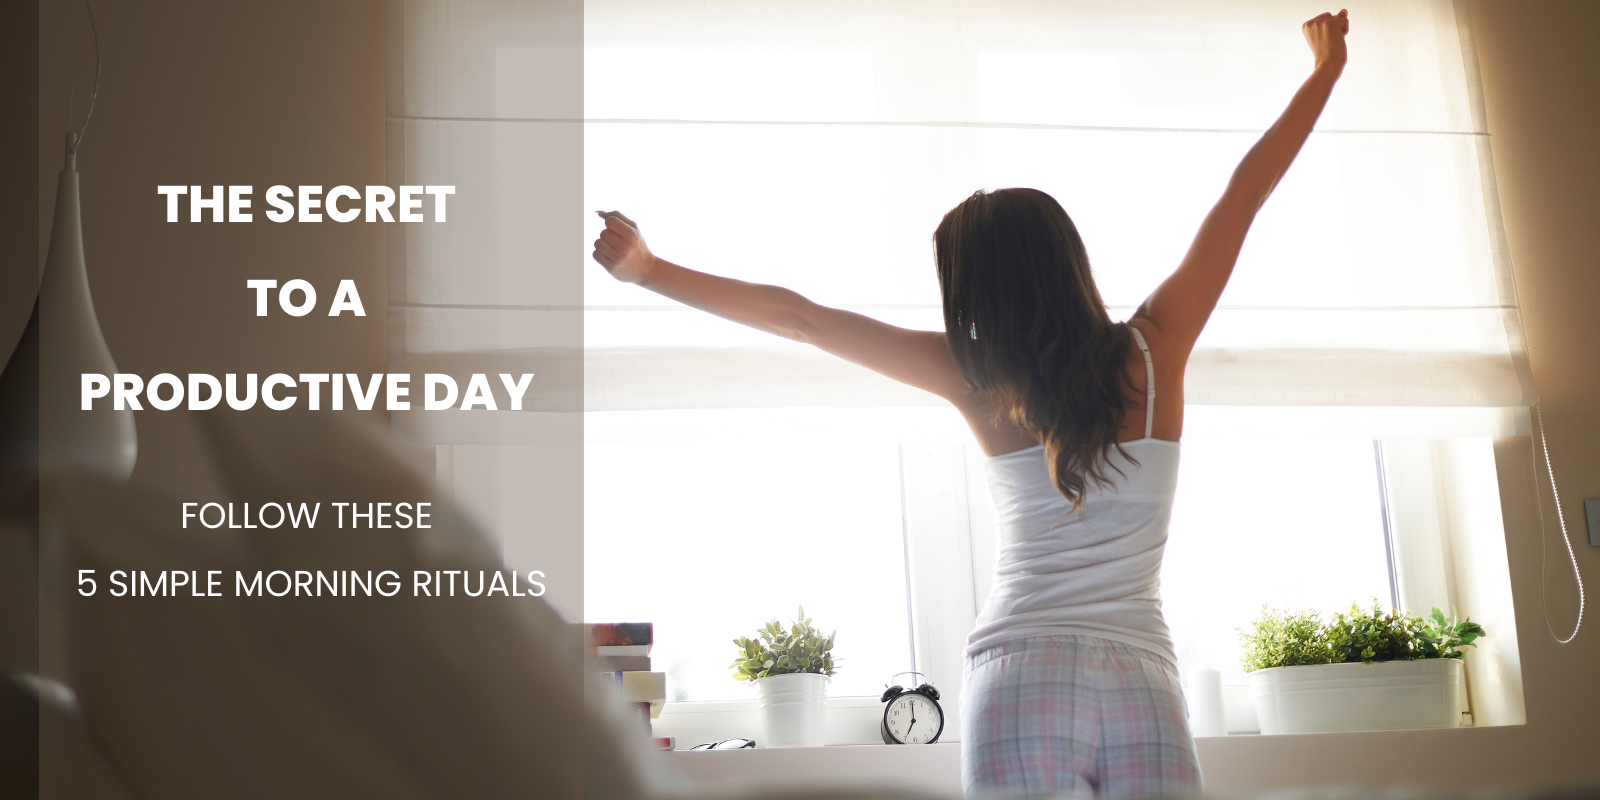 The secret to a Productive Day - Ayurvedic Morning Rituals